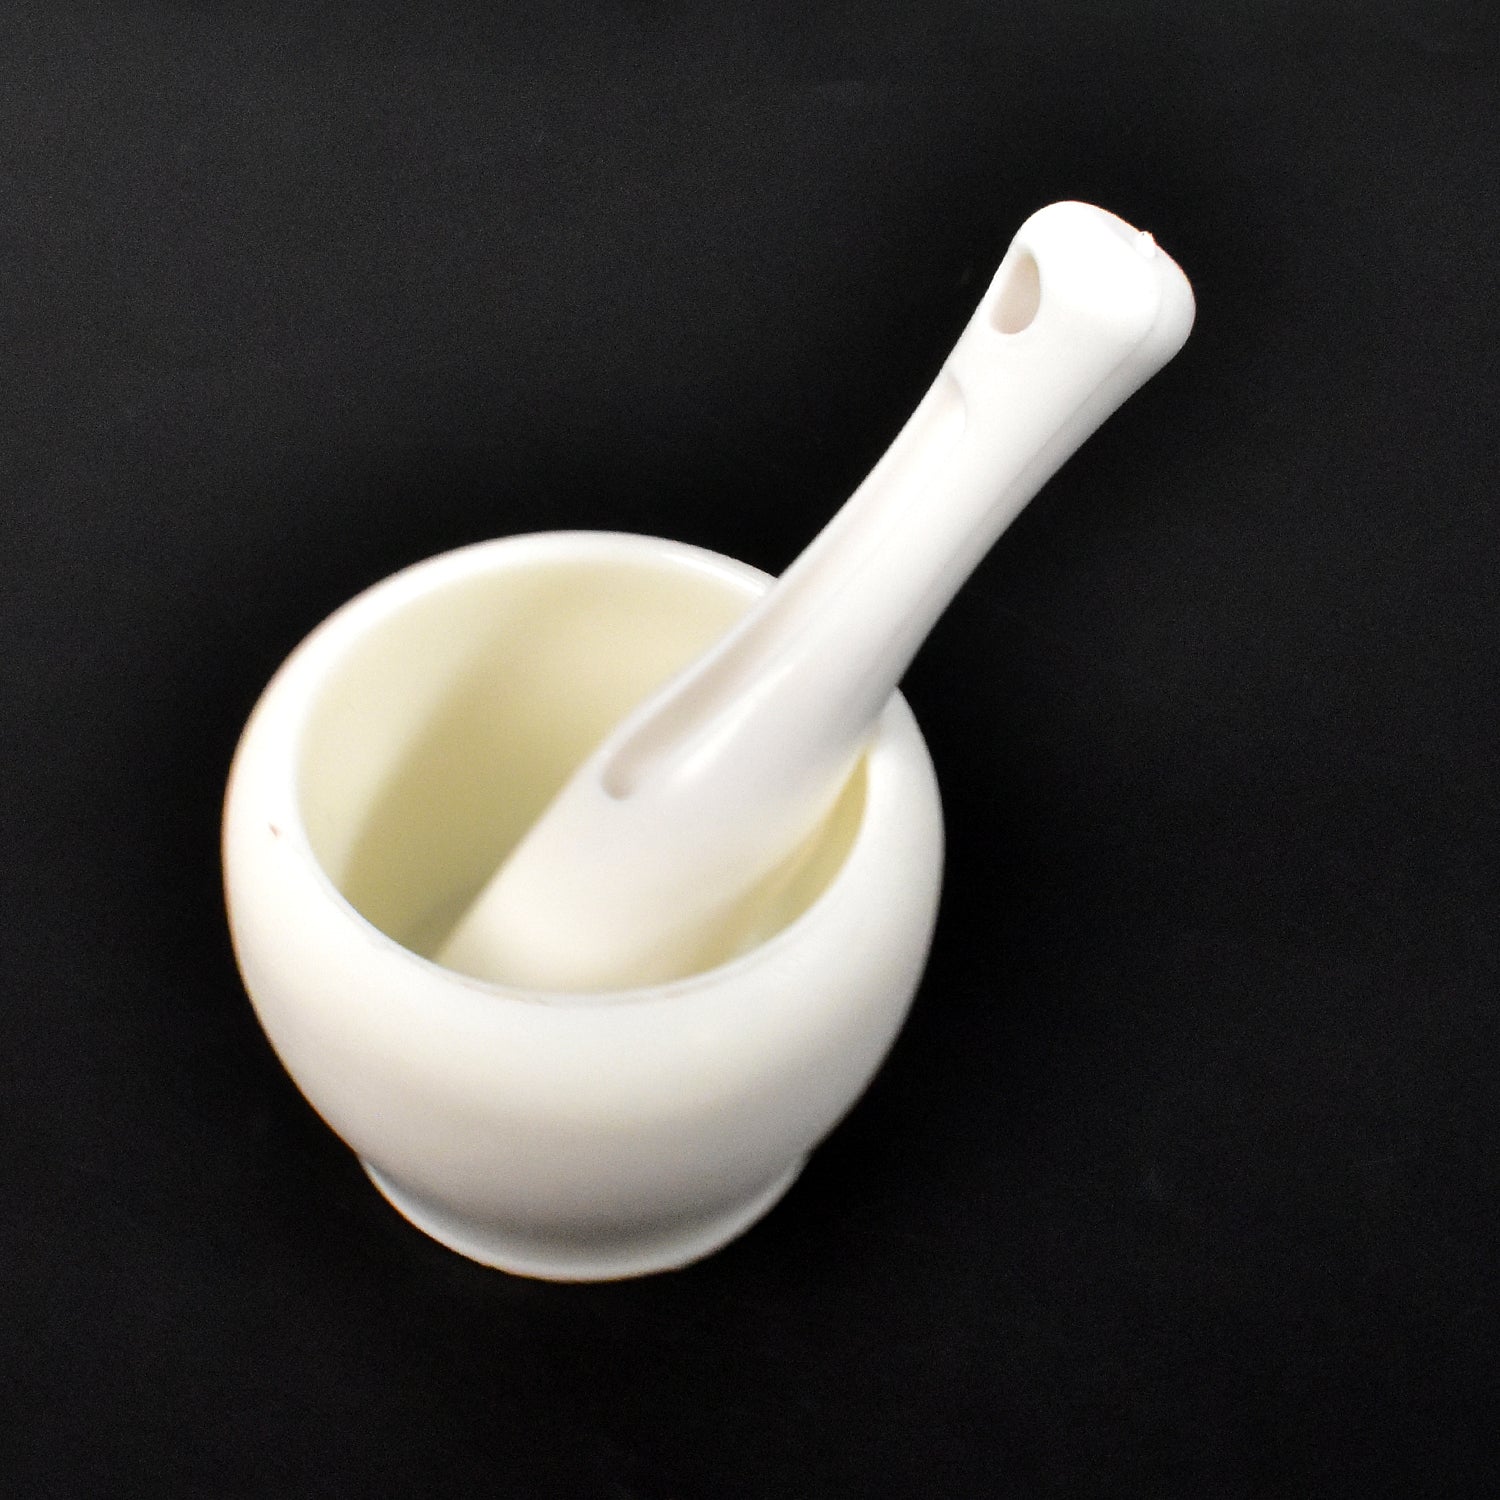 7193  Mortar and Pestle Set for Spices, Okhli Masher, Khalbatta, Kharal, Mixer, Natural & Traditional Grinder and Musal, Well Design for Kitchen, Home, Herb DeoDap